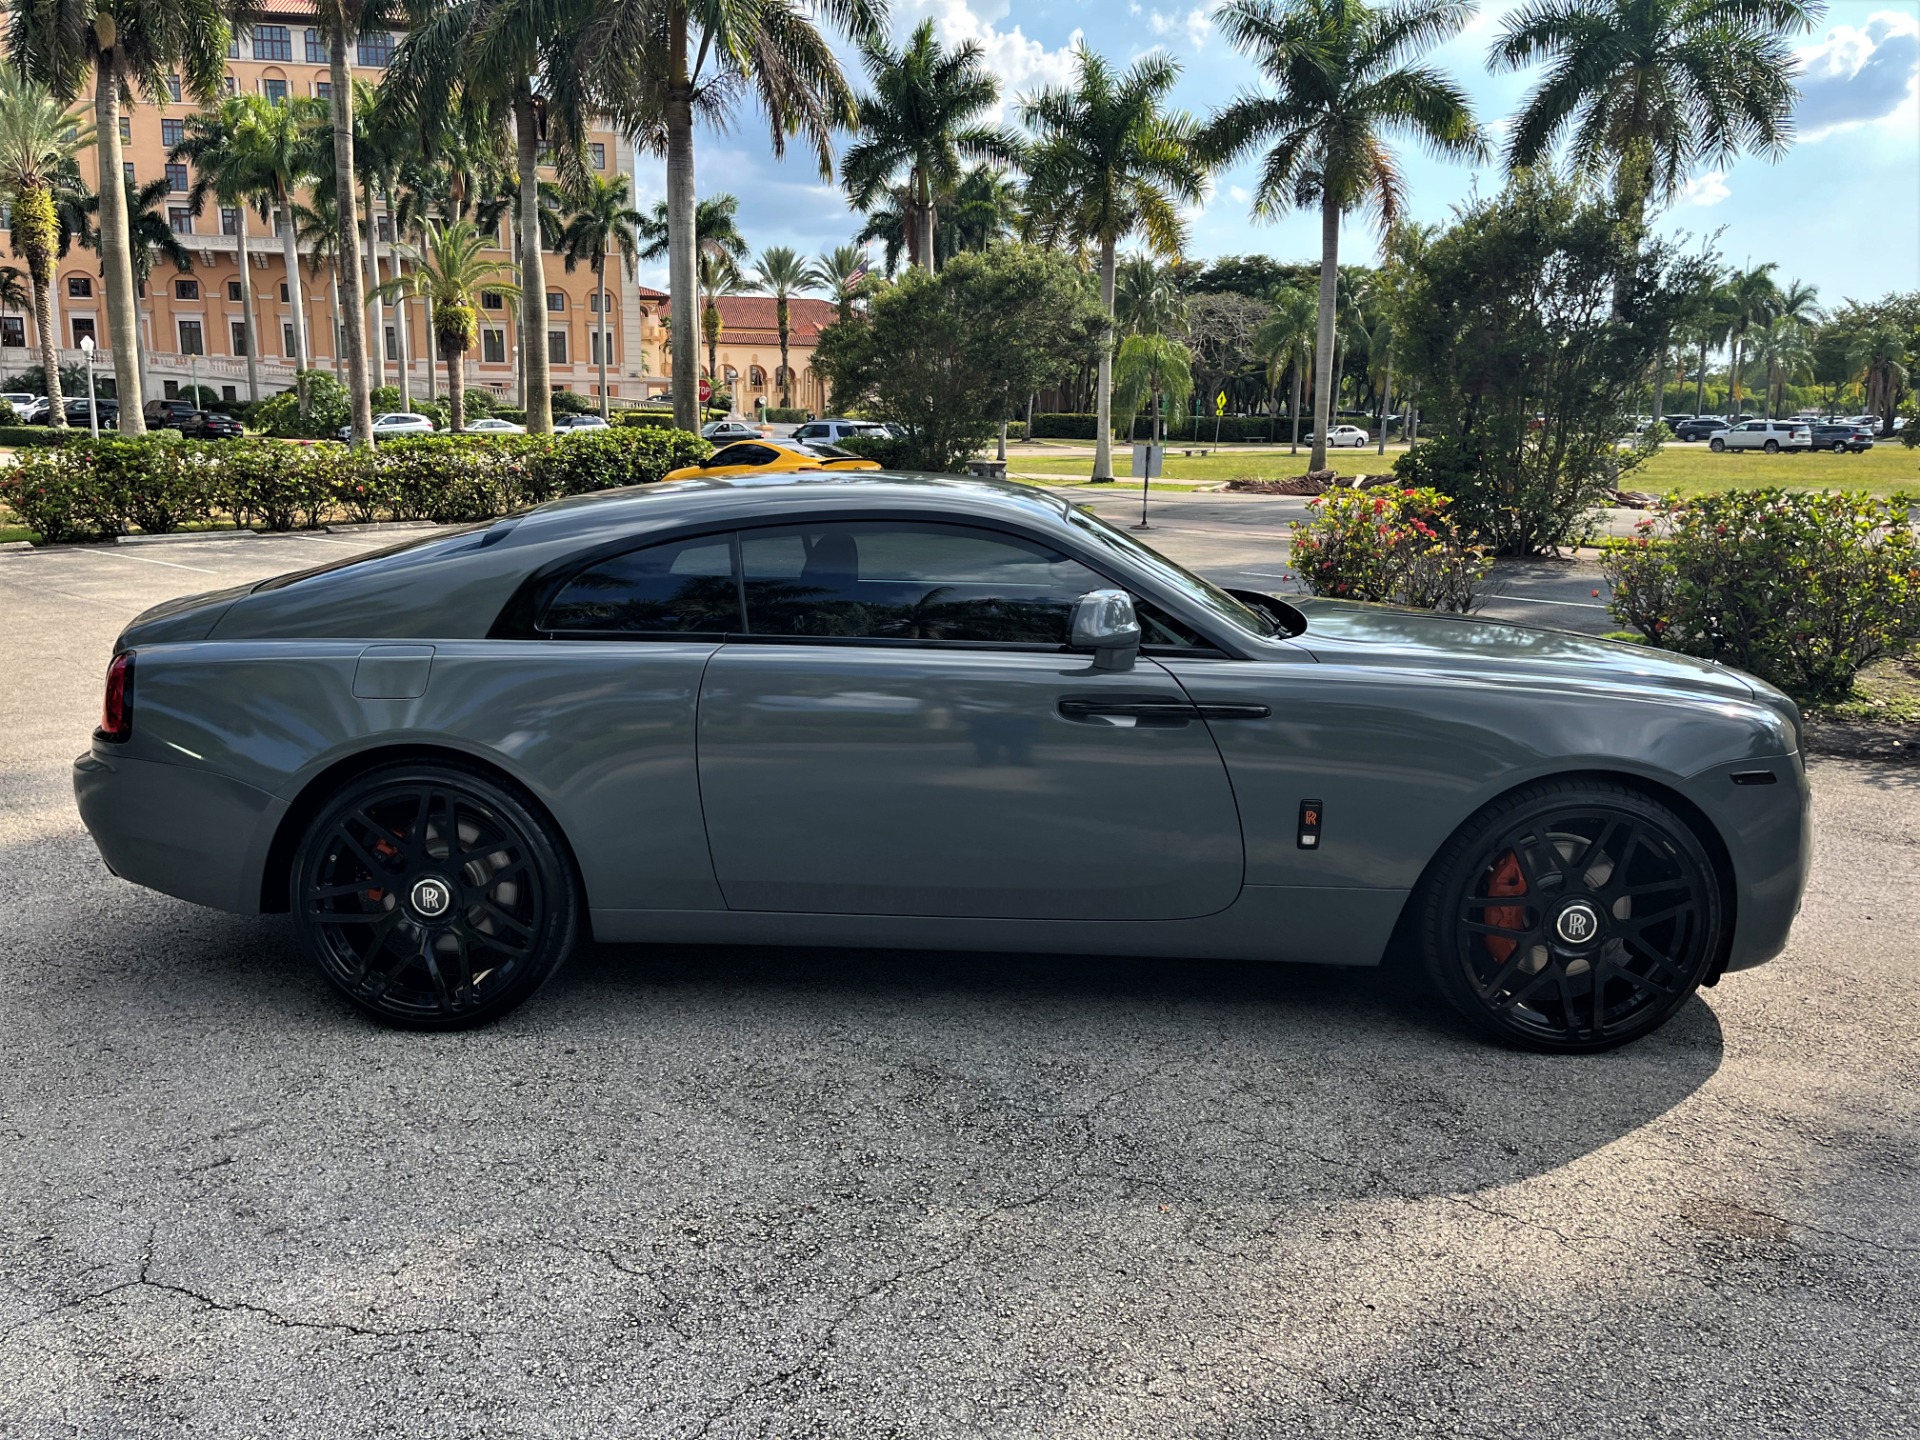 Used 2015 Rolls-Royce Wraith for sale Sold at The Gables Sports Cars in Miami FL 33146 4